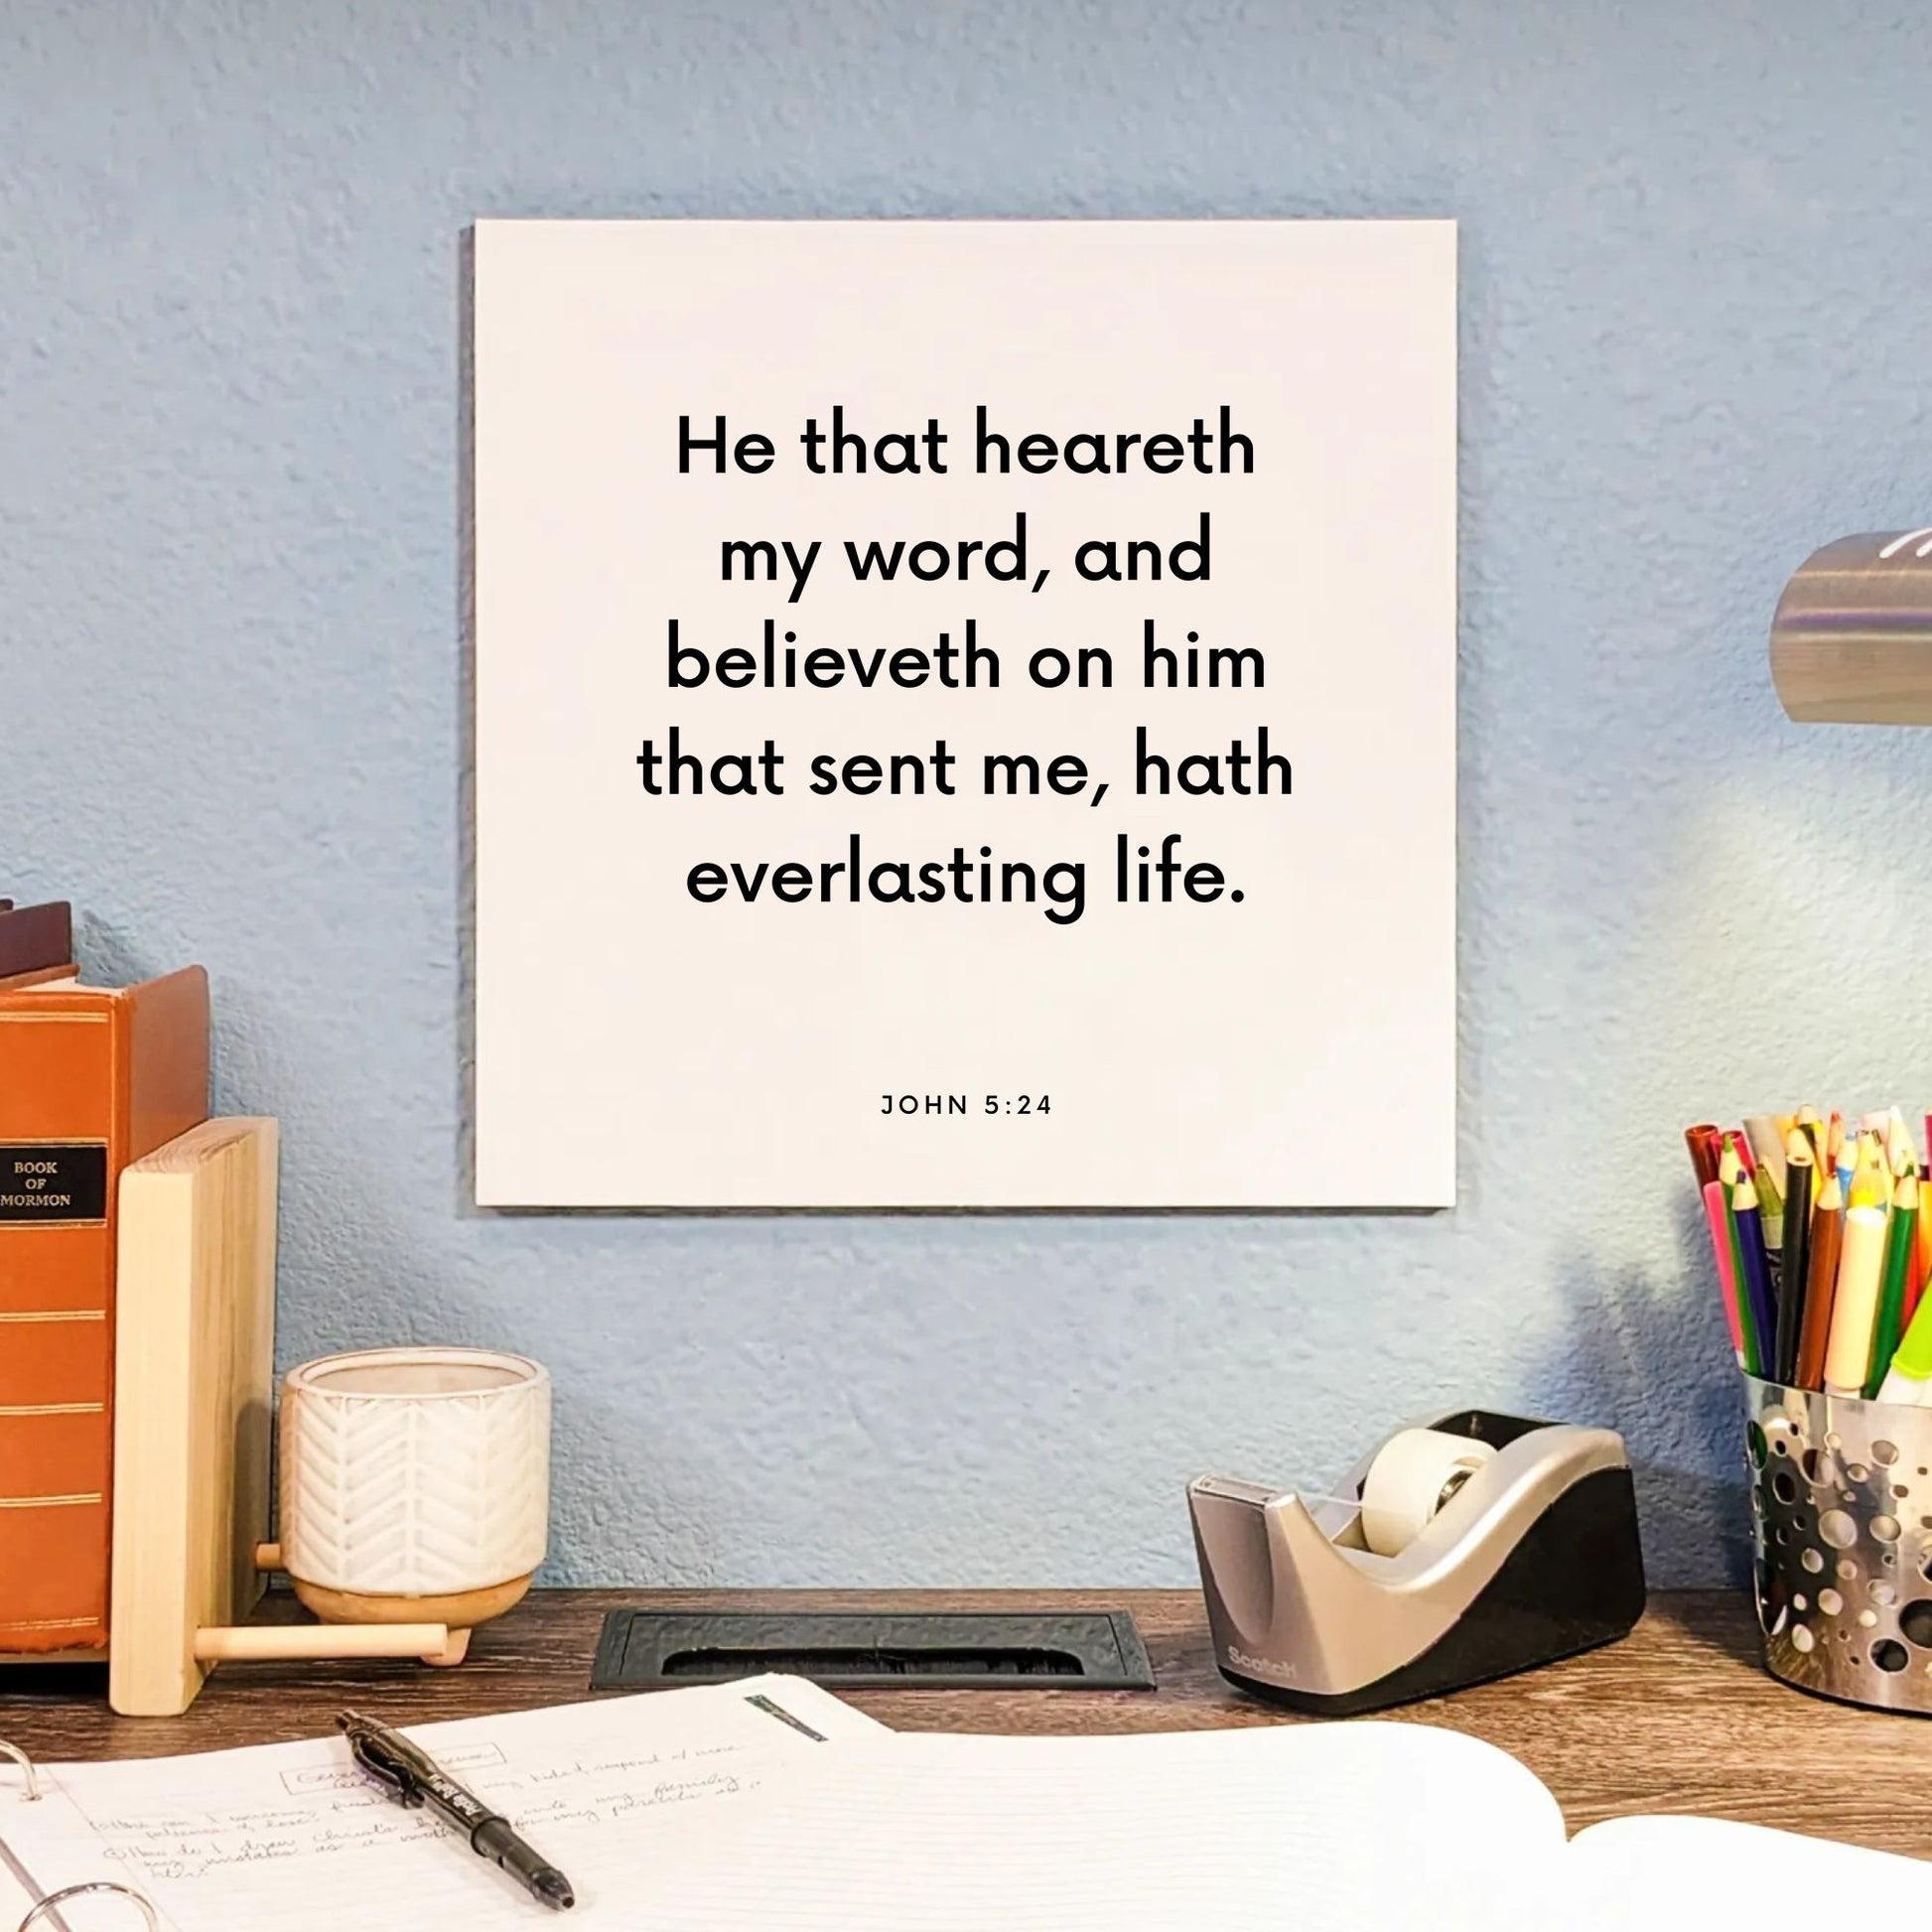 Desk mouting of the scripture tile for John 5:24 - "He that heareth my word hath everlasting life"